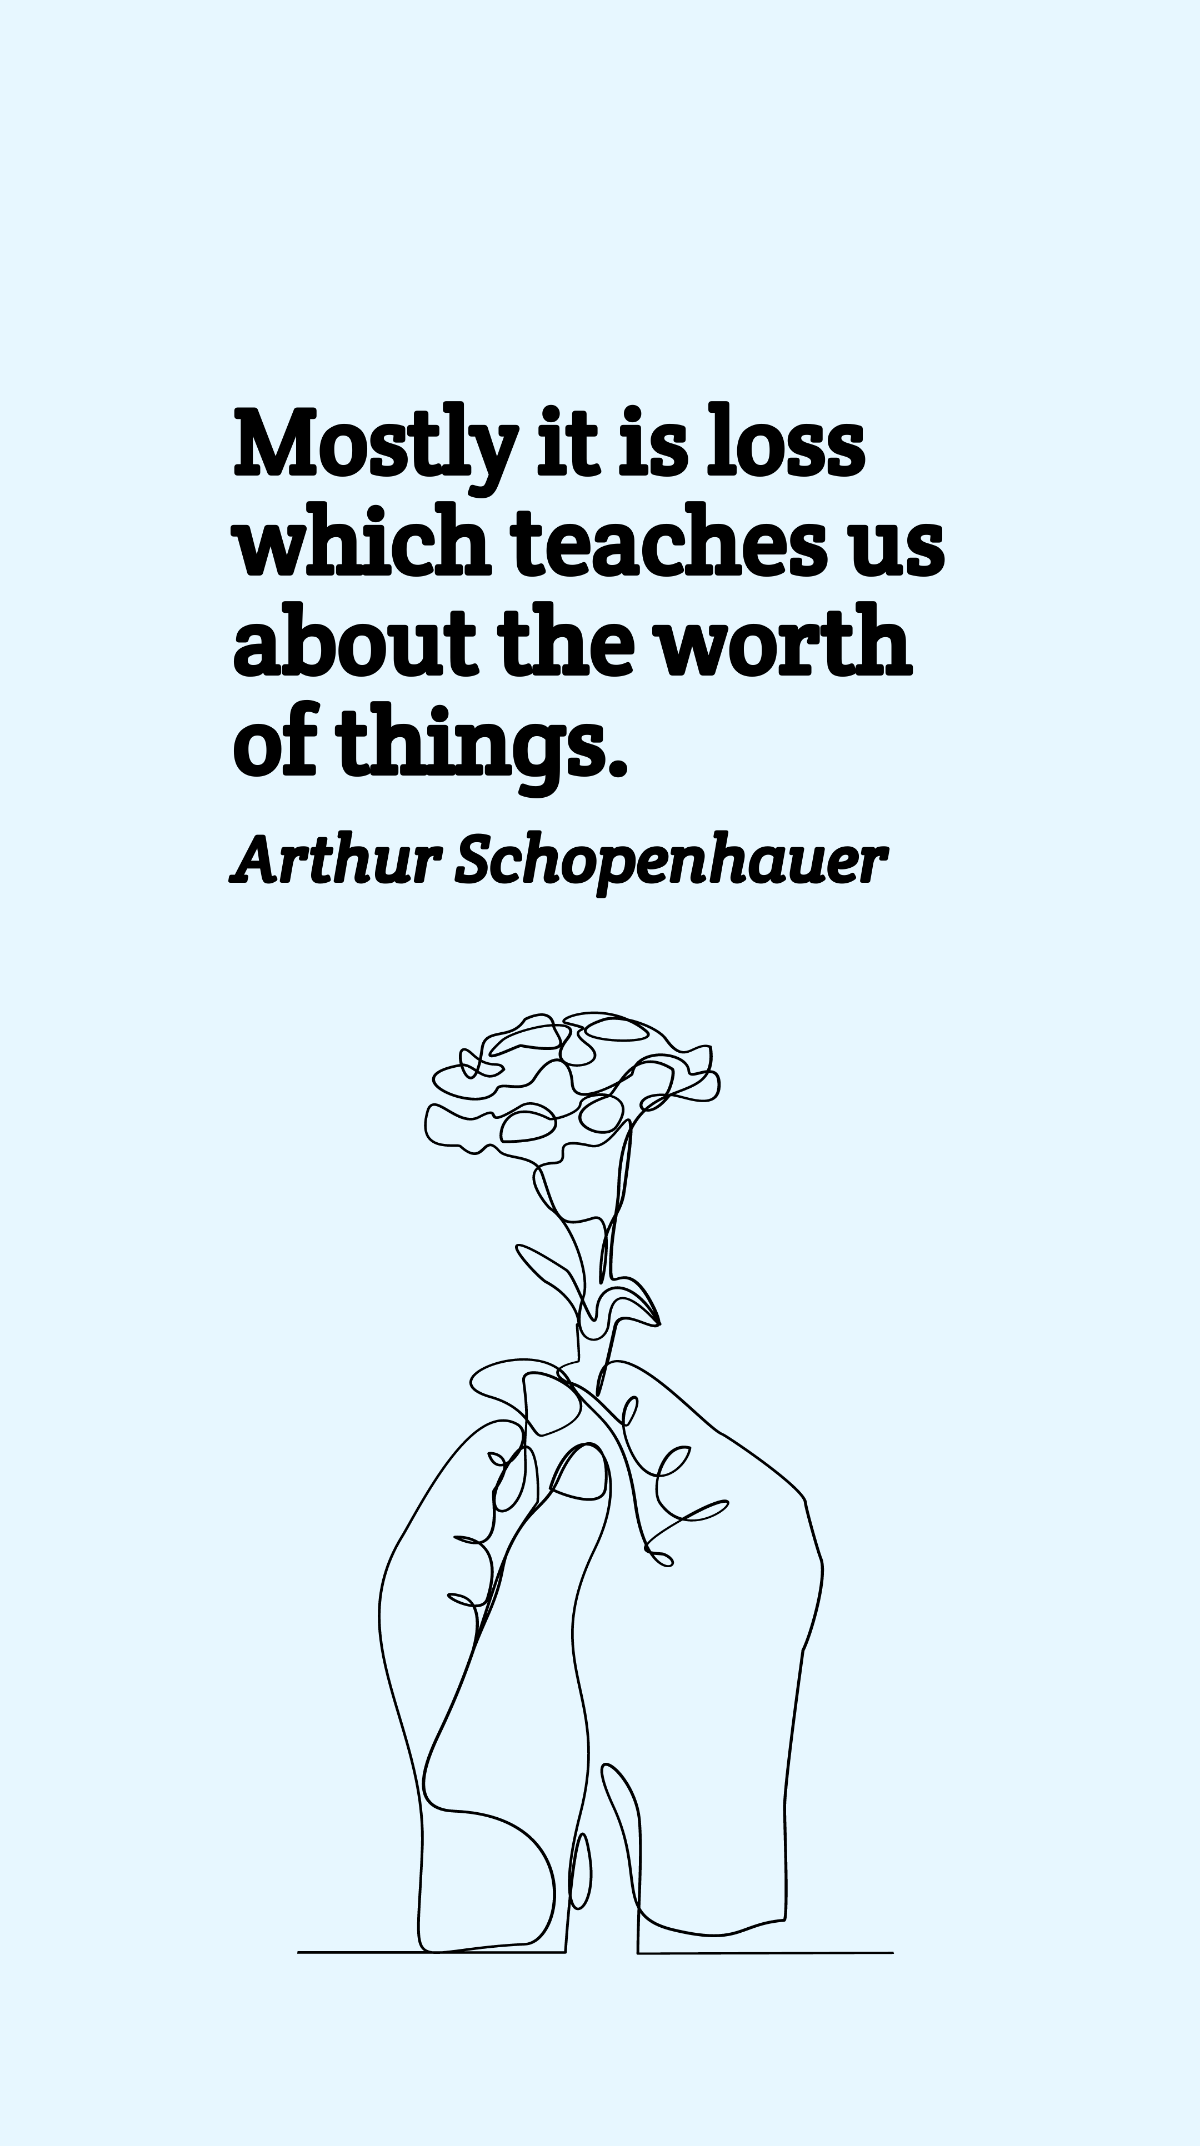 Free Arthur Schopenhauer - Mostly it is loss which teaches us about the worth of things. Template